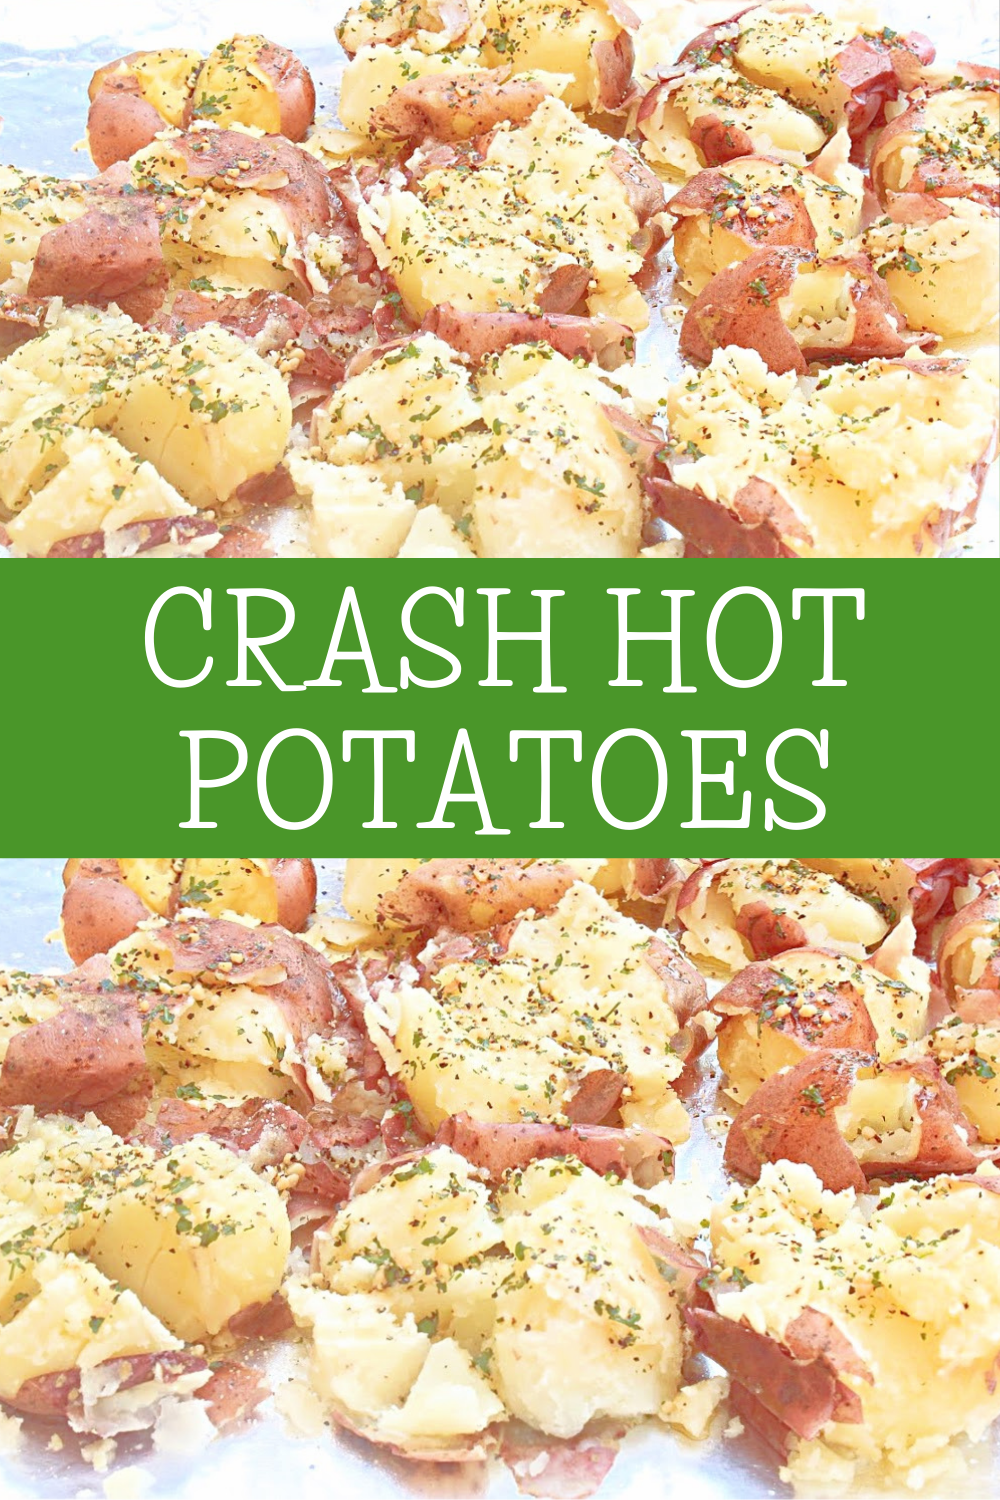 Crash Hot Potatoes ~ A simple and savory, fun and tasty, alternative to traditional baked potatoes! via @thiswifecooks